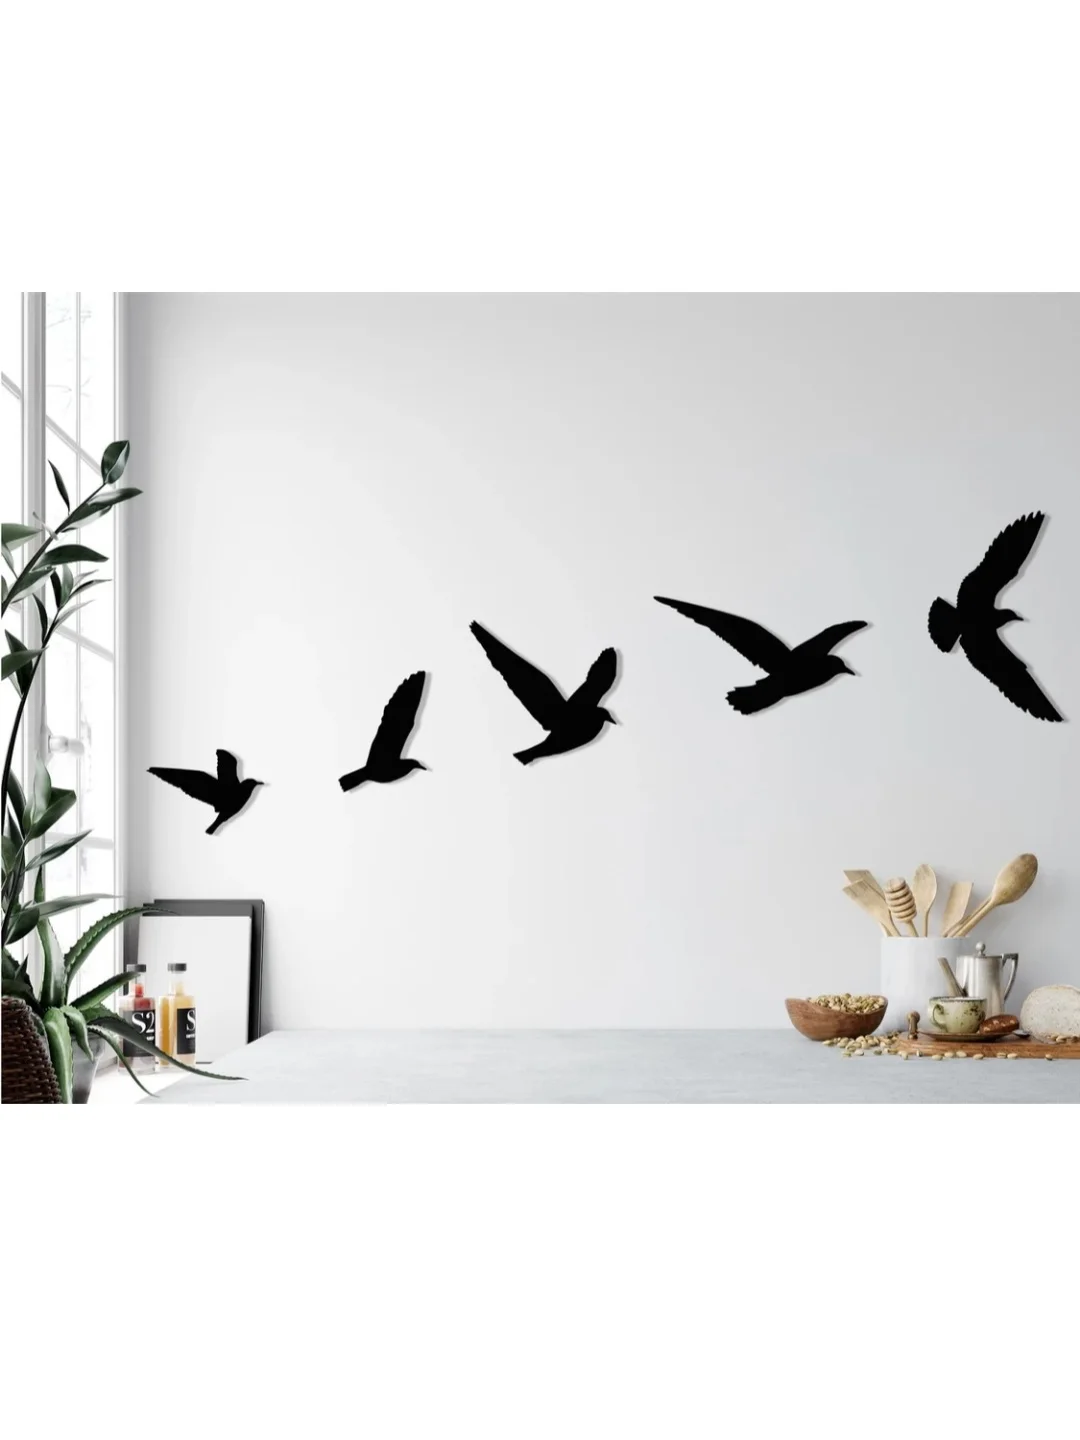 Decorative Bird Figured Modern Black Quality Mdf Wall Decoration Product Object New Luxury Home Design Long Life Ornaments